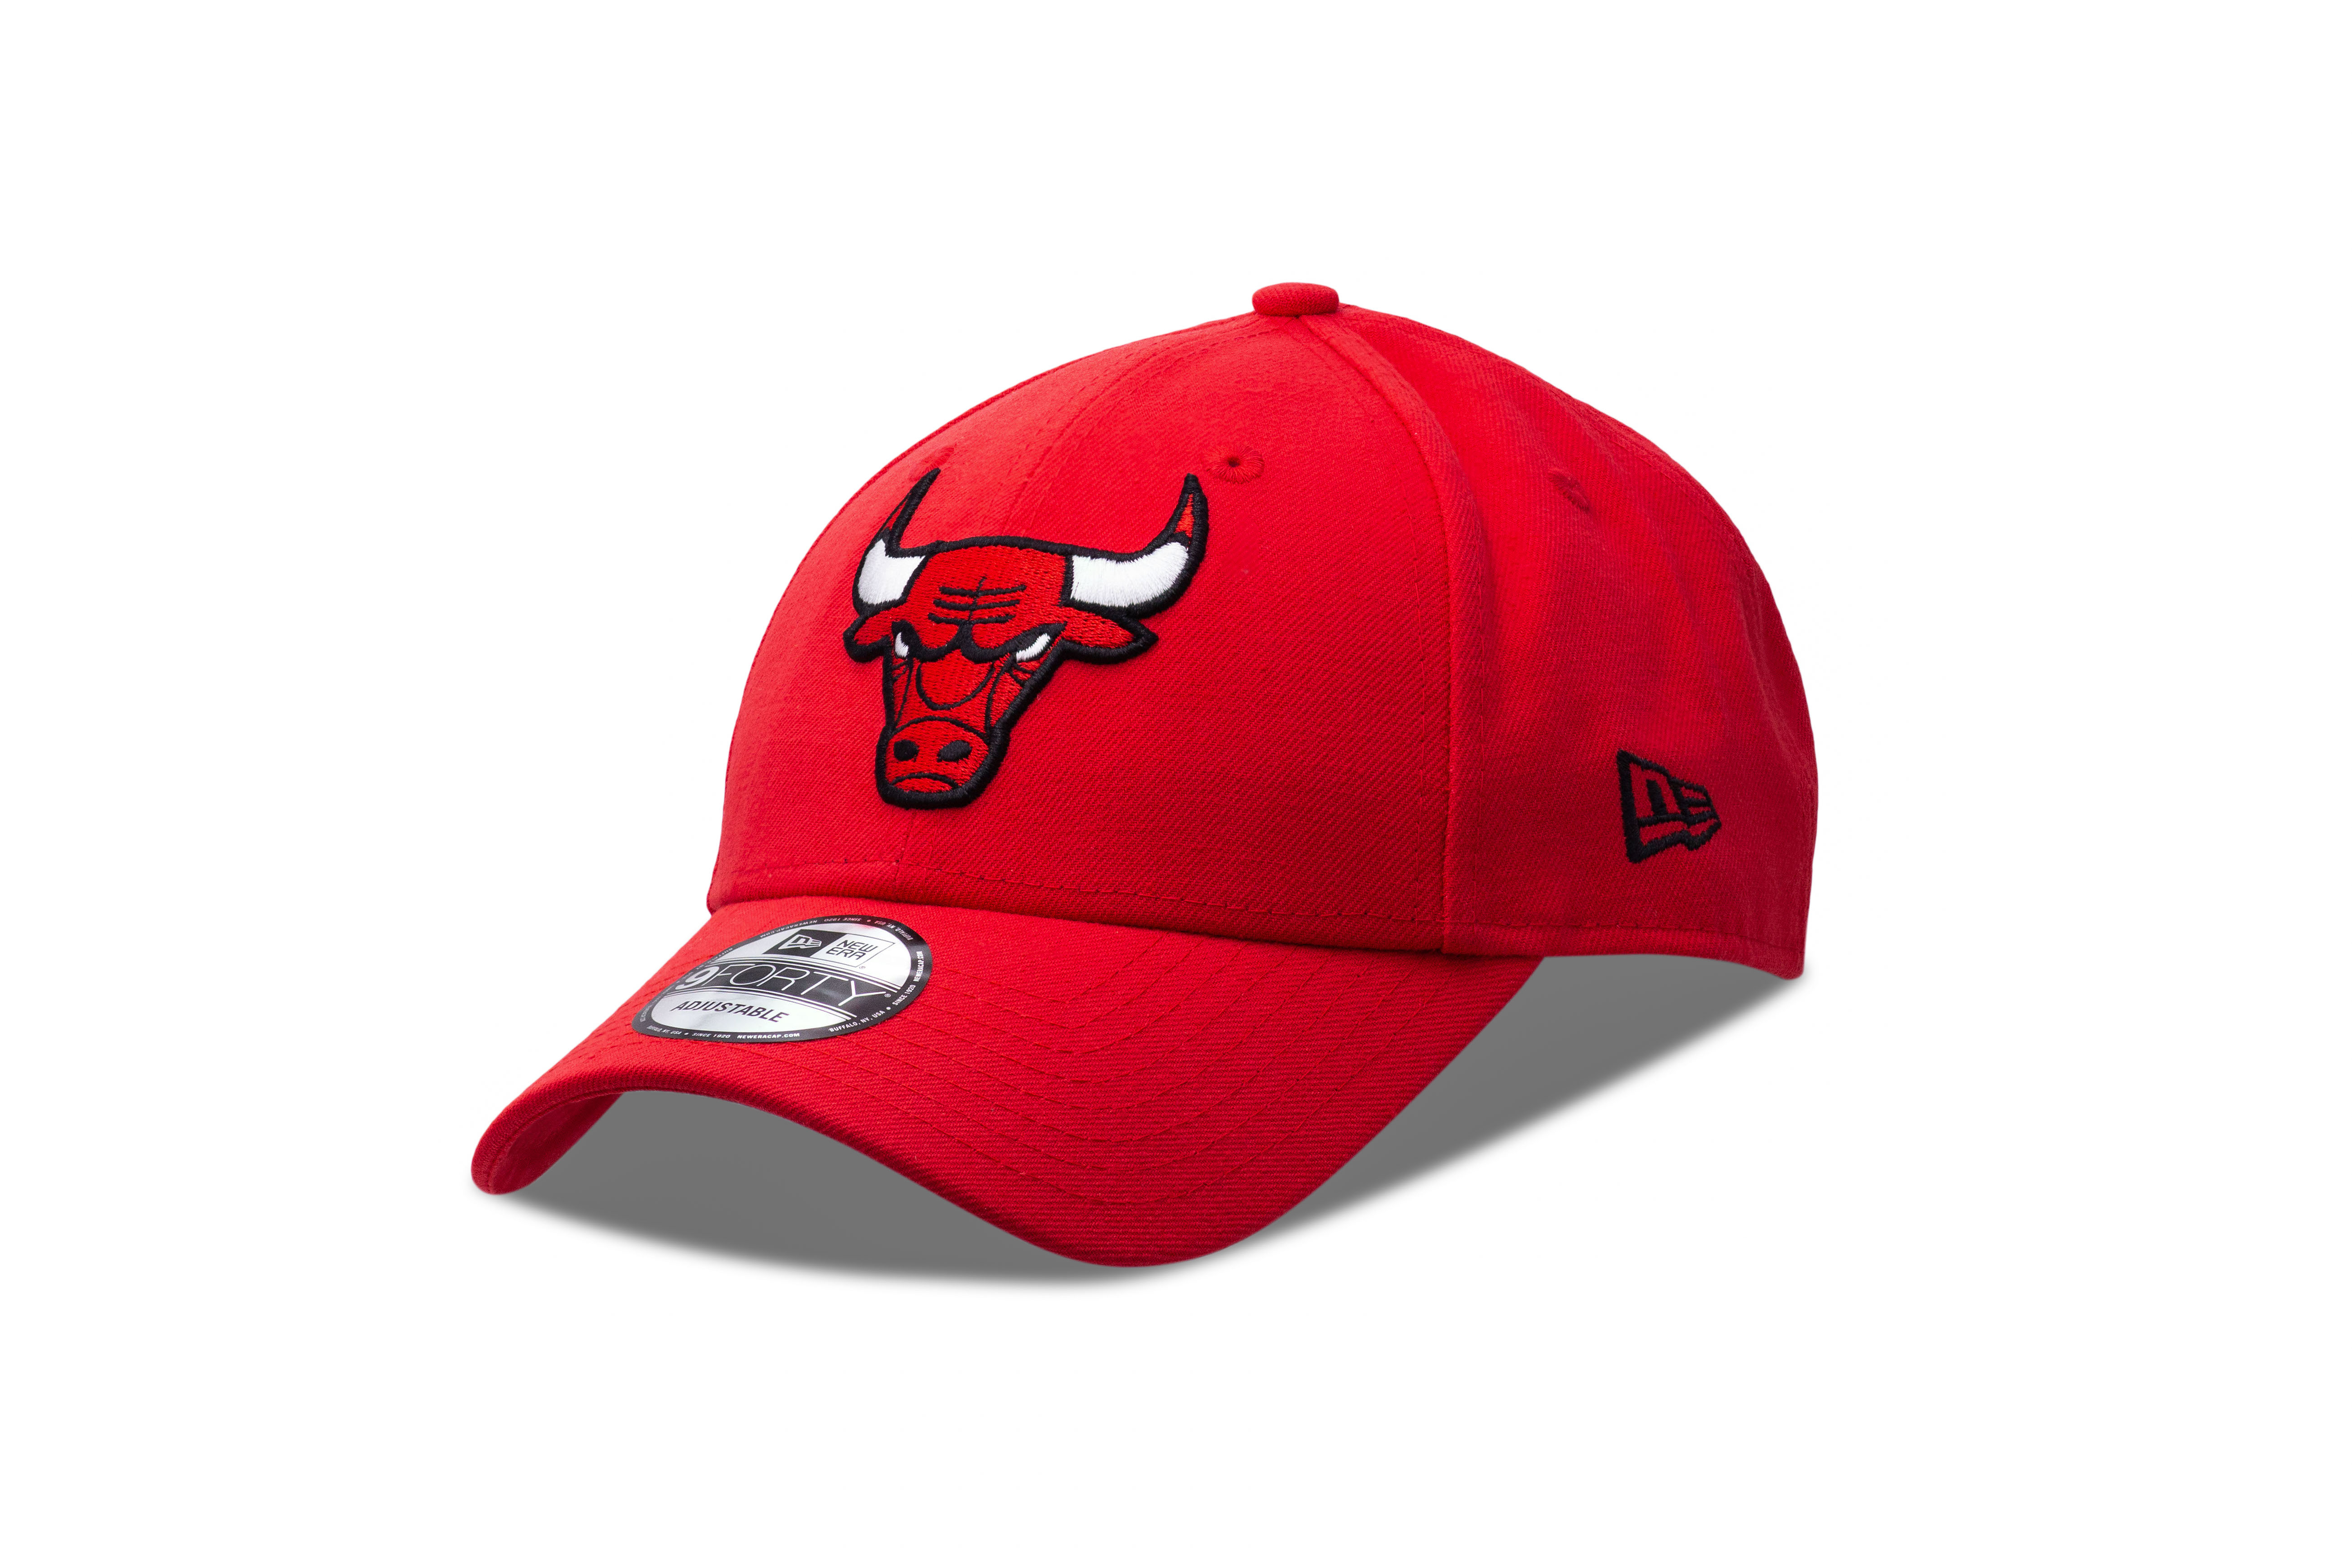 New Era NBA Chicago Bulls The League 9Forty Adjustable Cap - Red - One Size